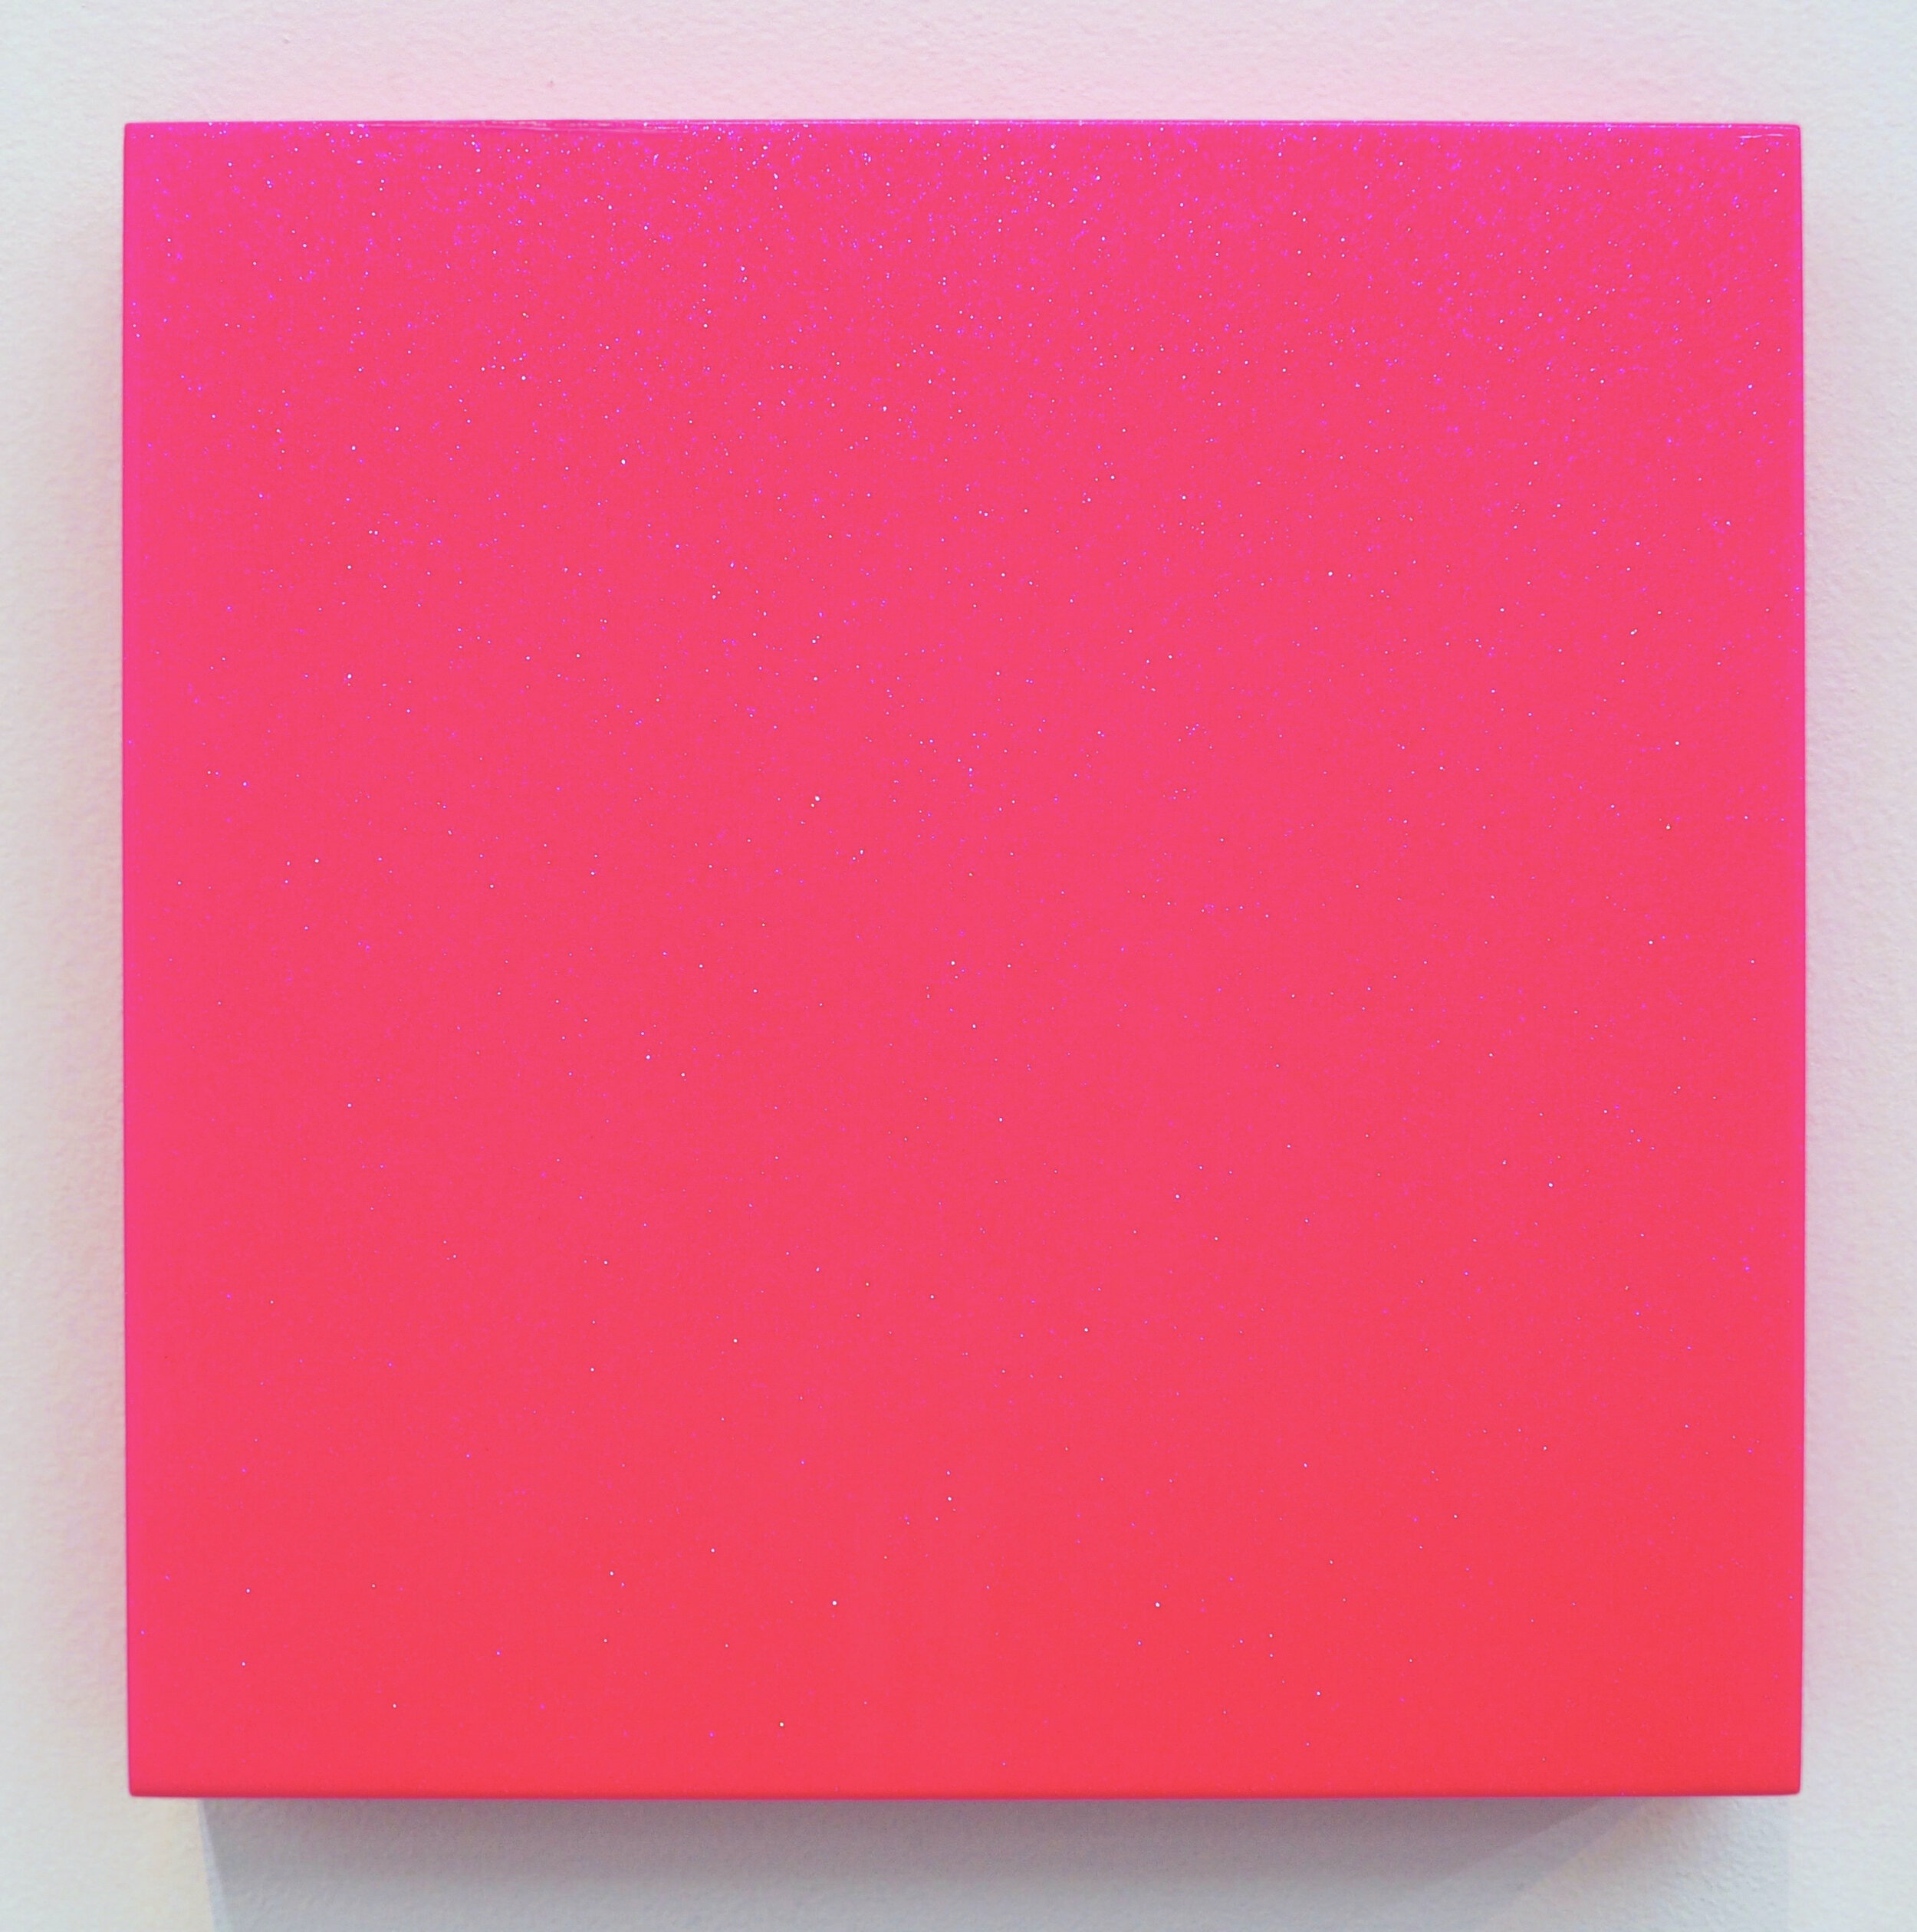   Pinkest Pink Protest , 2020 urethane, crystals, and pinkest pink pigment on wood panel 12 x 12 in (30.5 x 30.5 cm)  